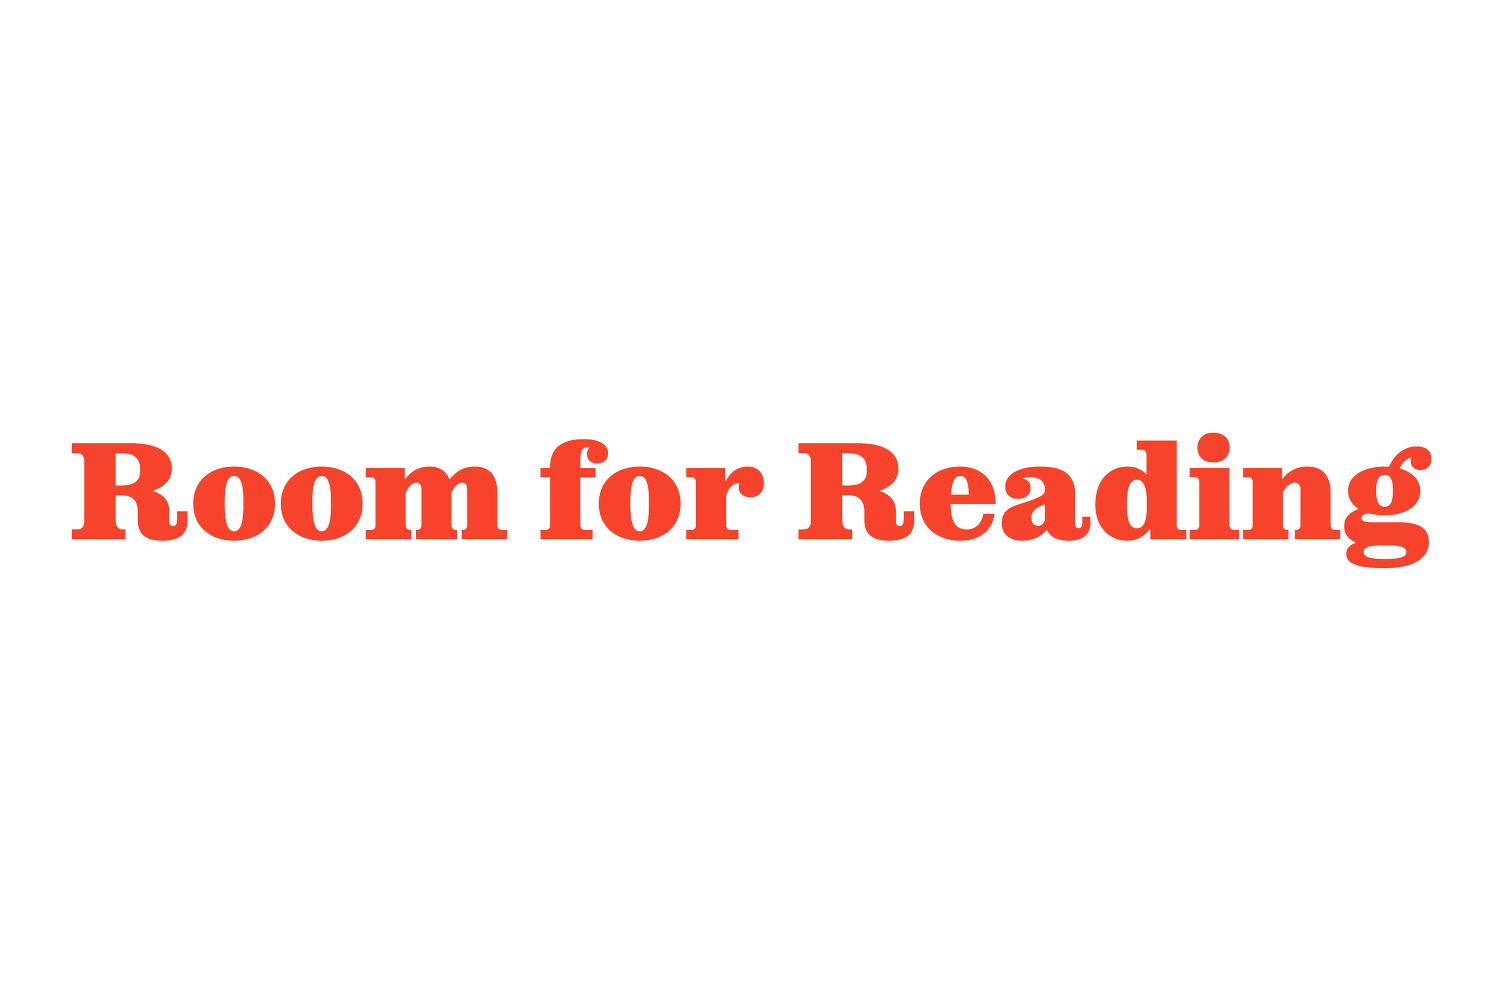 Room for Reading